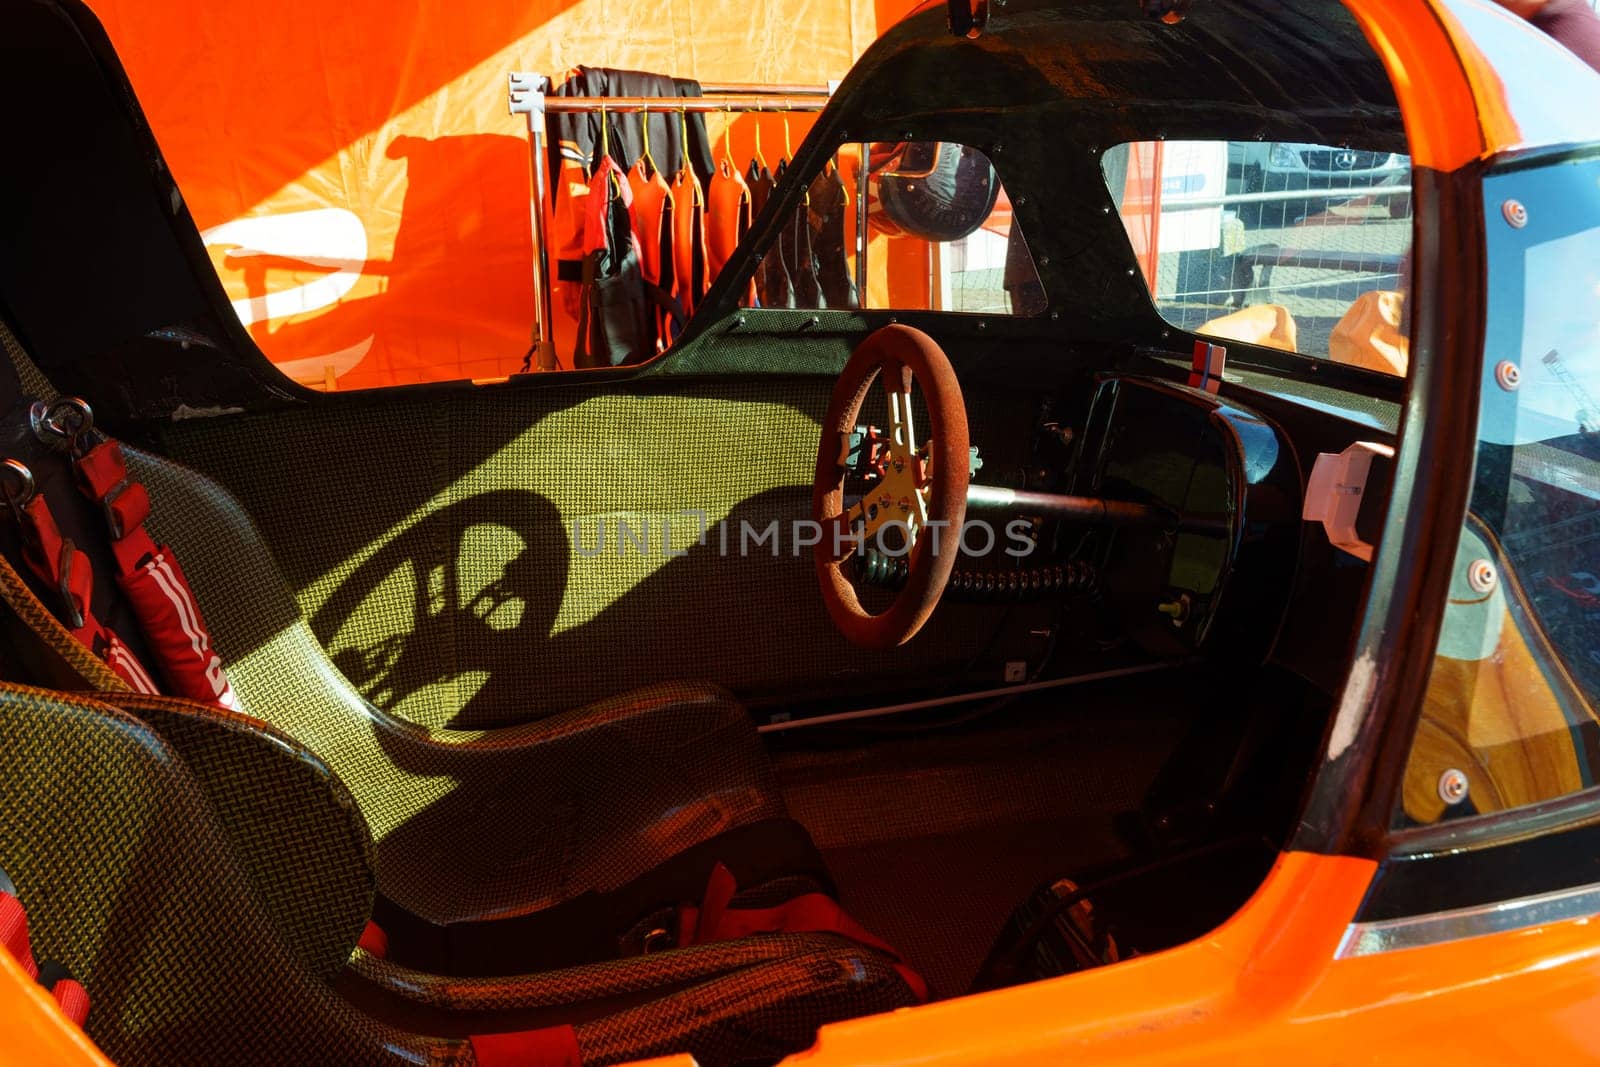 The interior of an orange car is shown, featuring a steering wheel and dashboard.